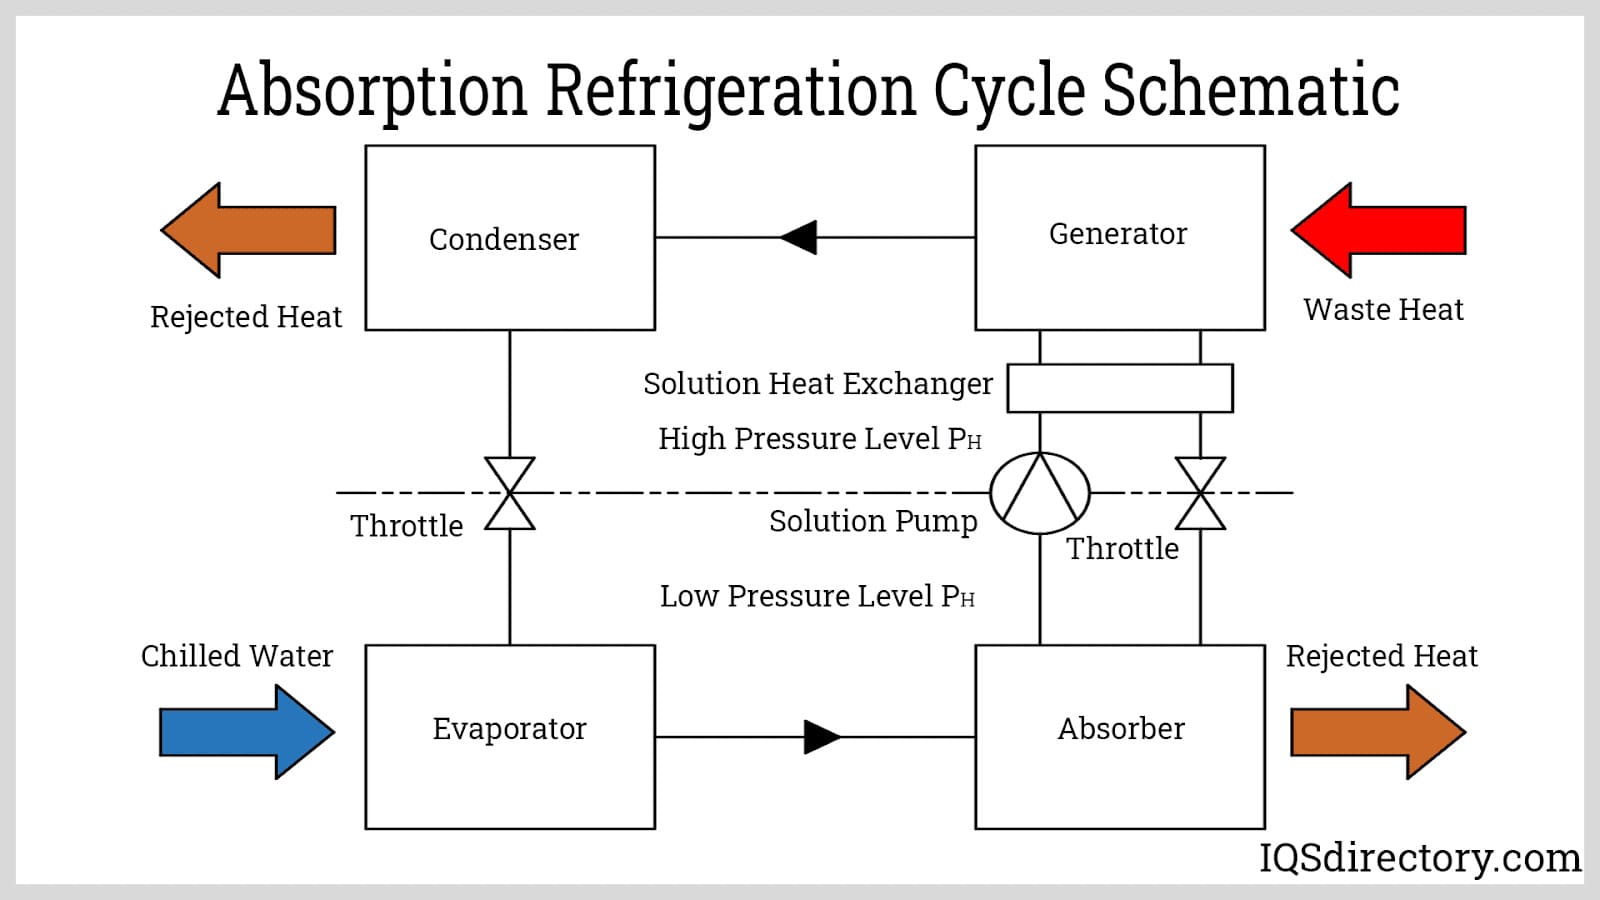 Absorption Refrigeration Cycle Schematic